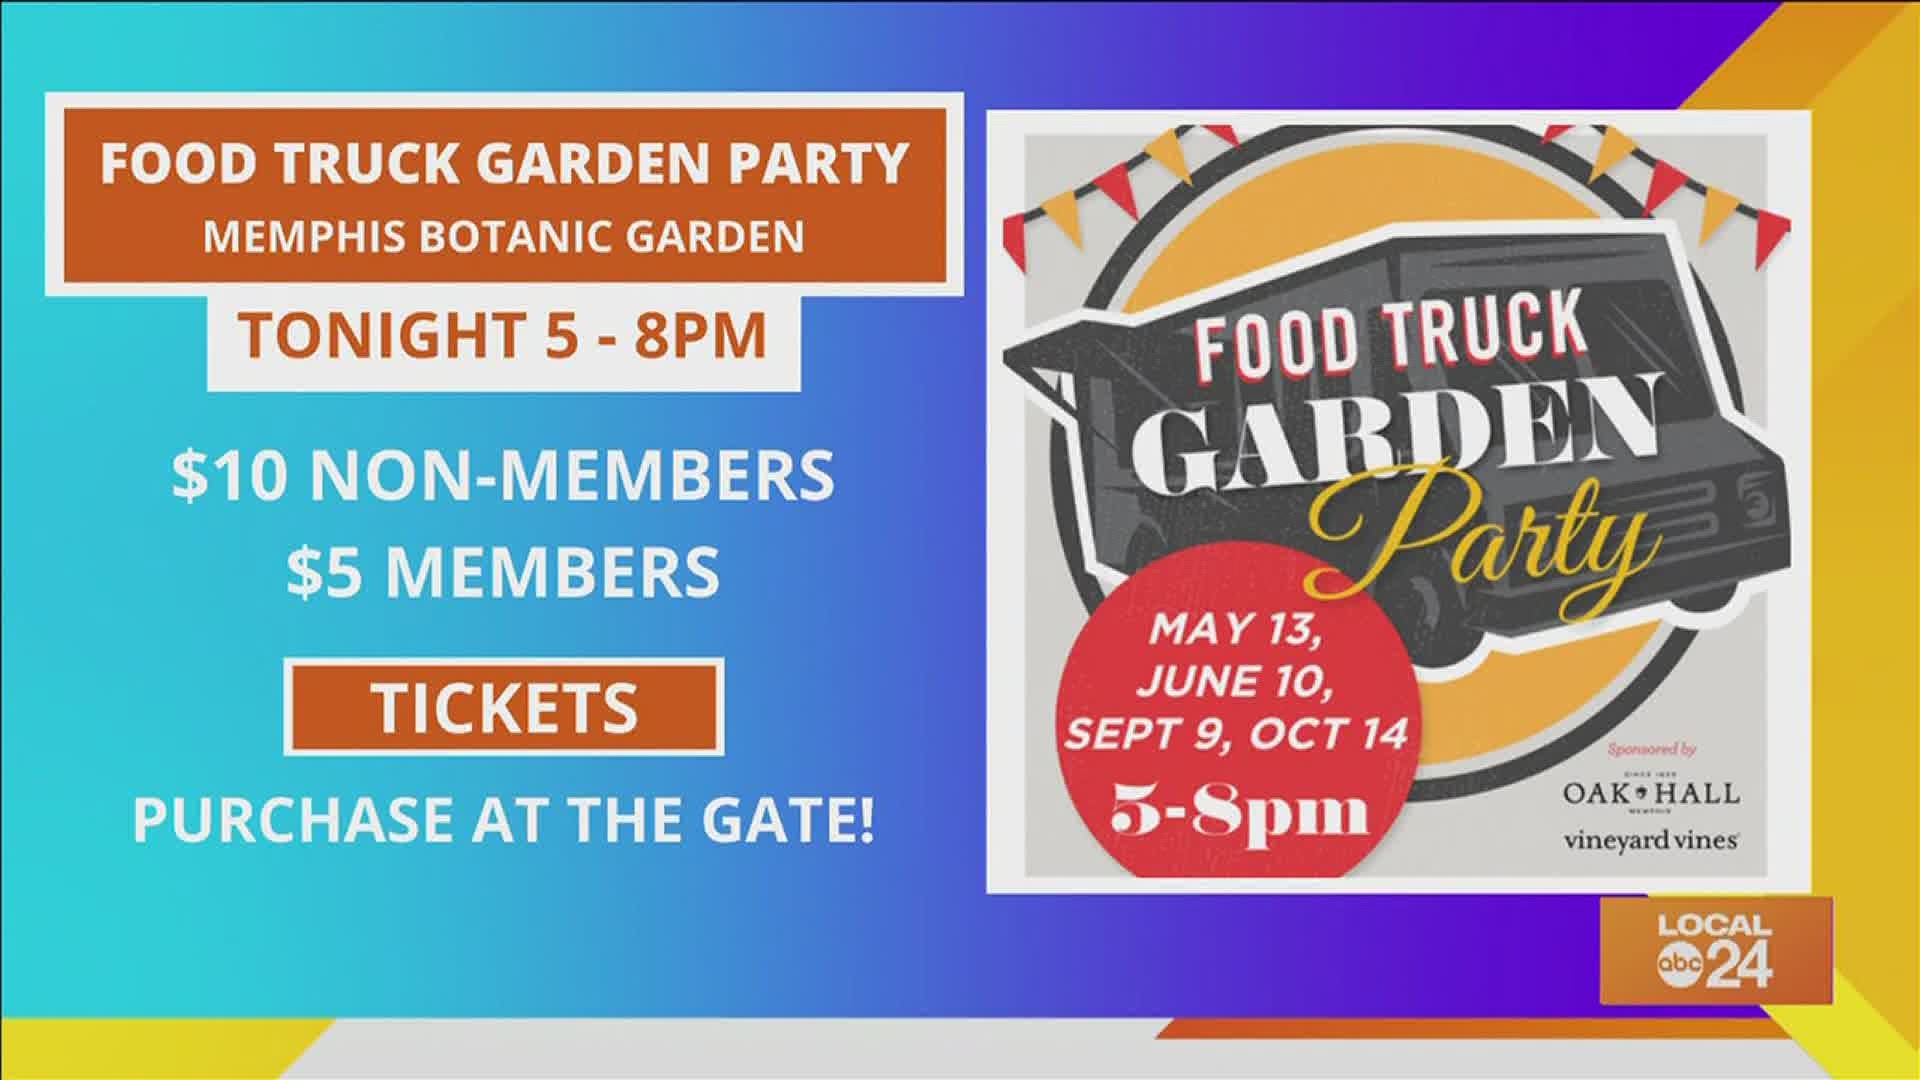 Looking to expand your Memphis food palette in a beautiful outdoor setting? Come to the Memphis Botanic Garden food truck party! Dogs are welcome!